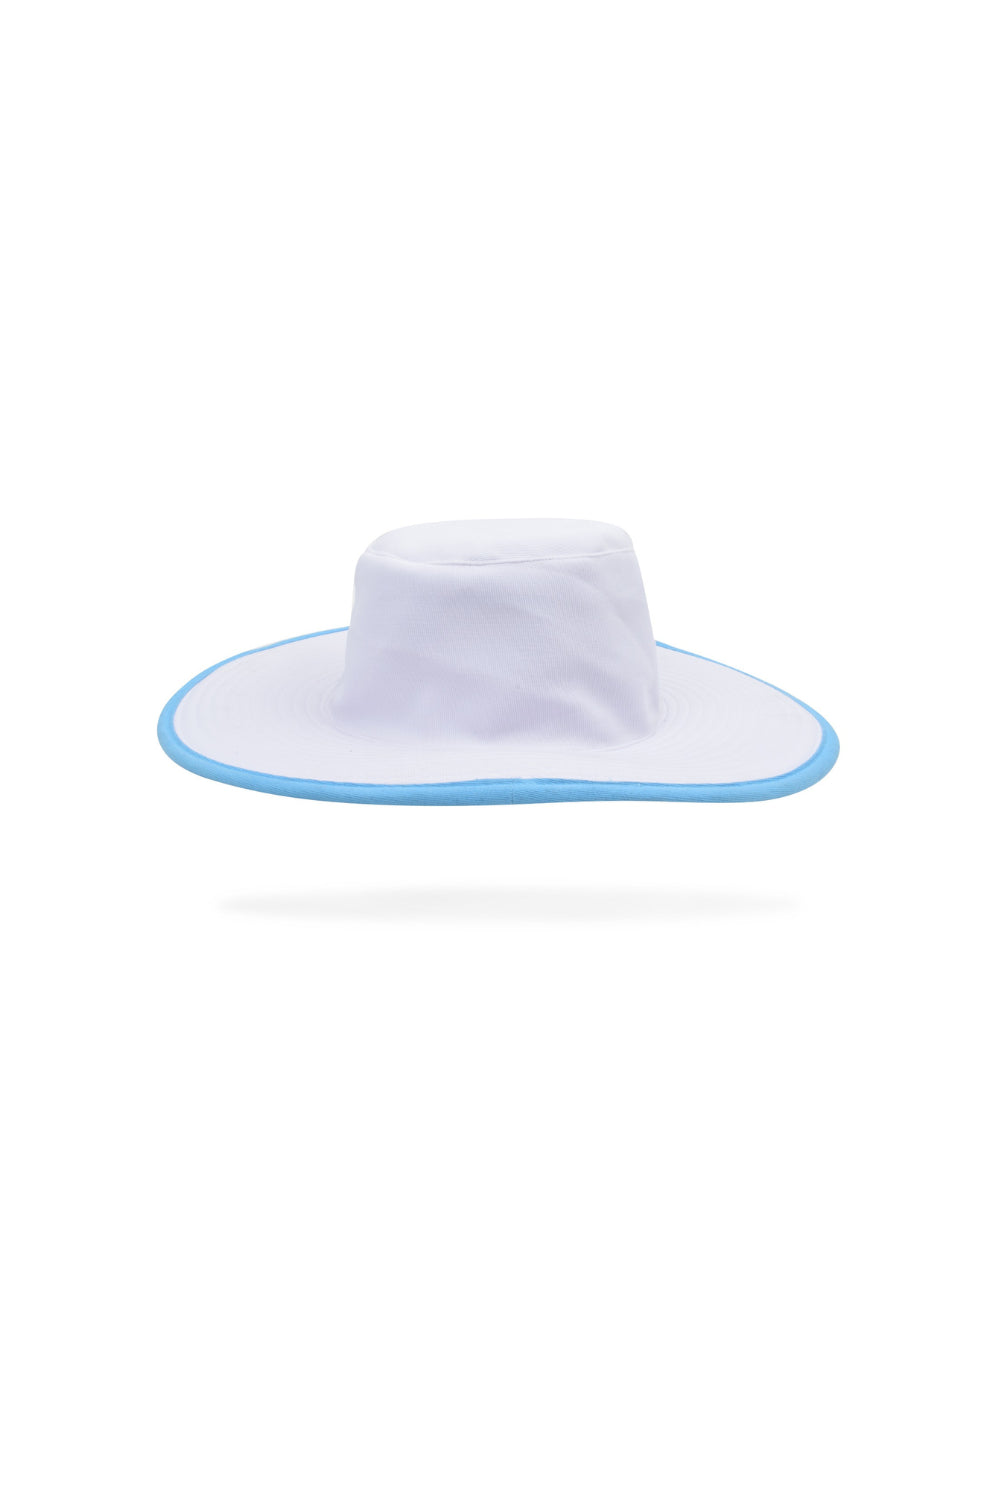 White color  Round Hat by One Player